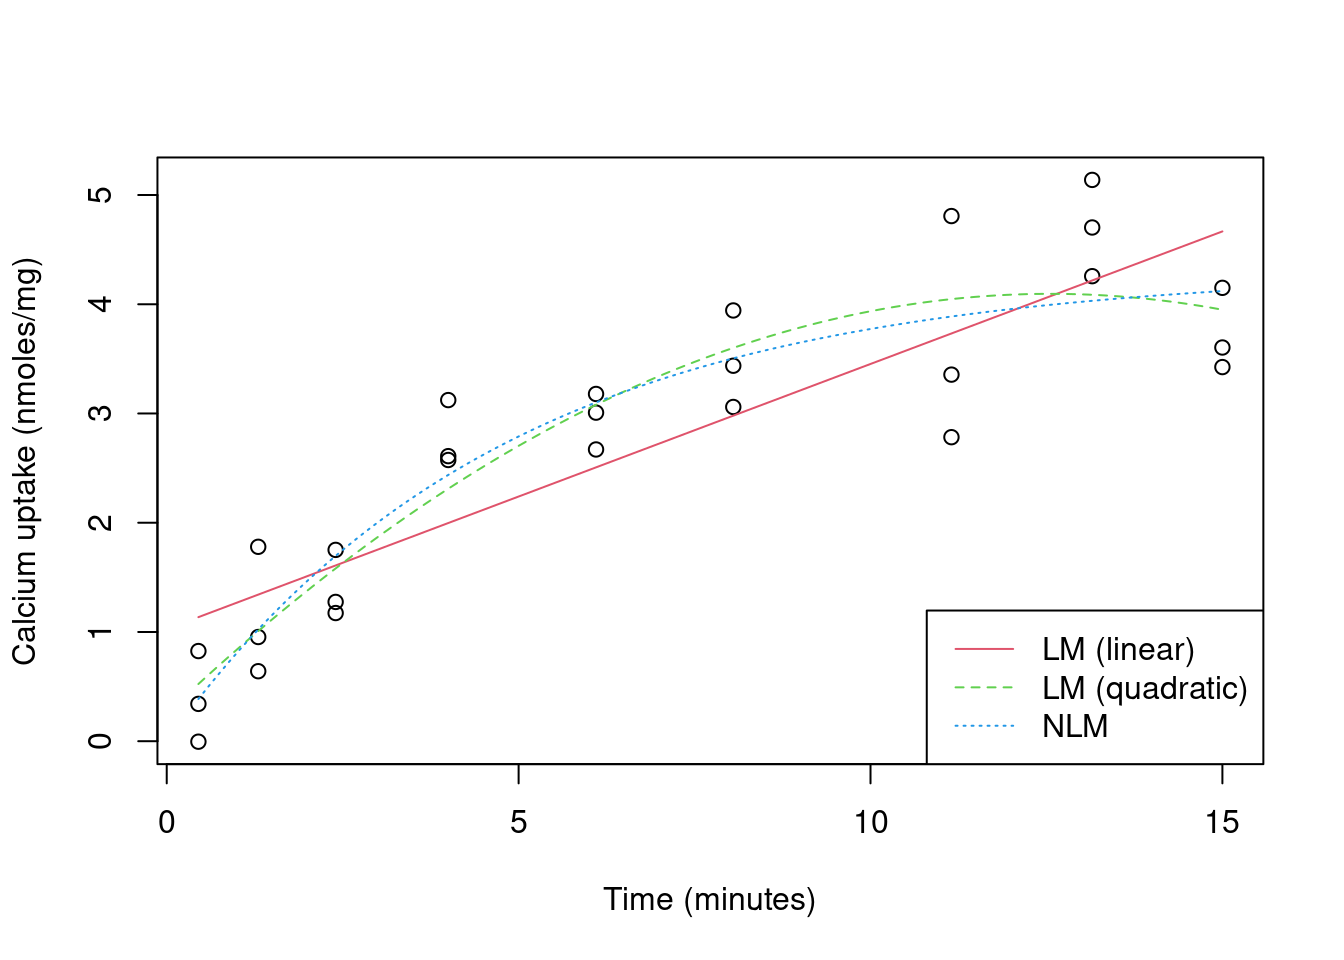 Calcium uptake against time, with expected uptake from three models overlaid